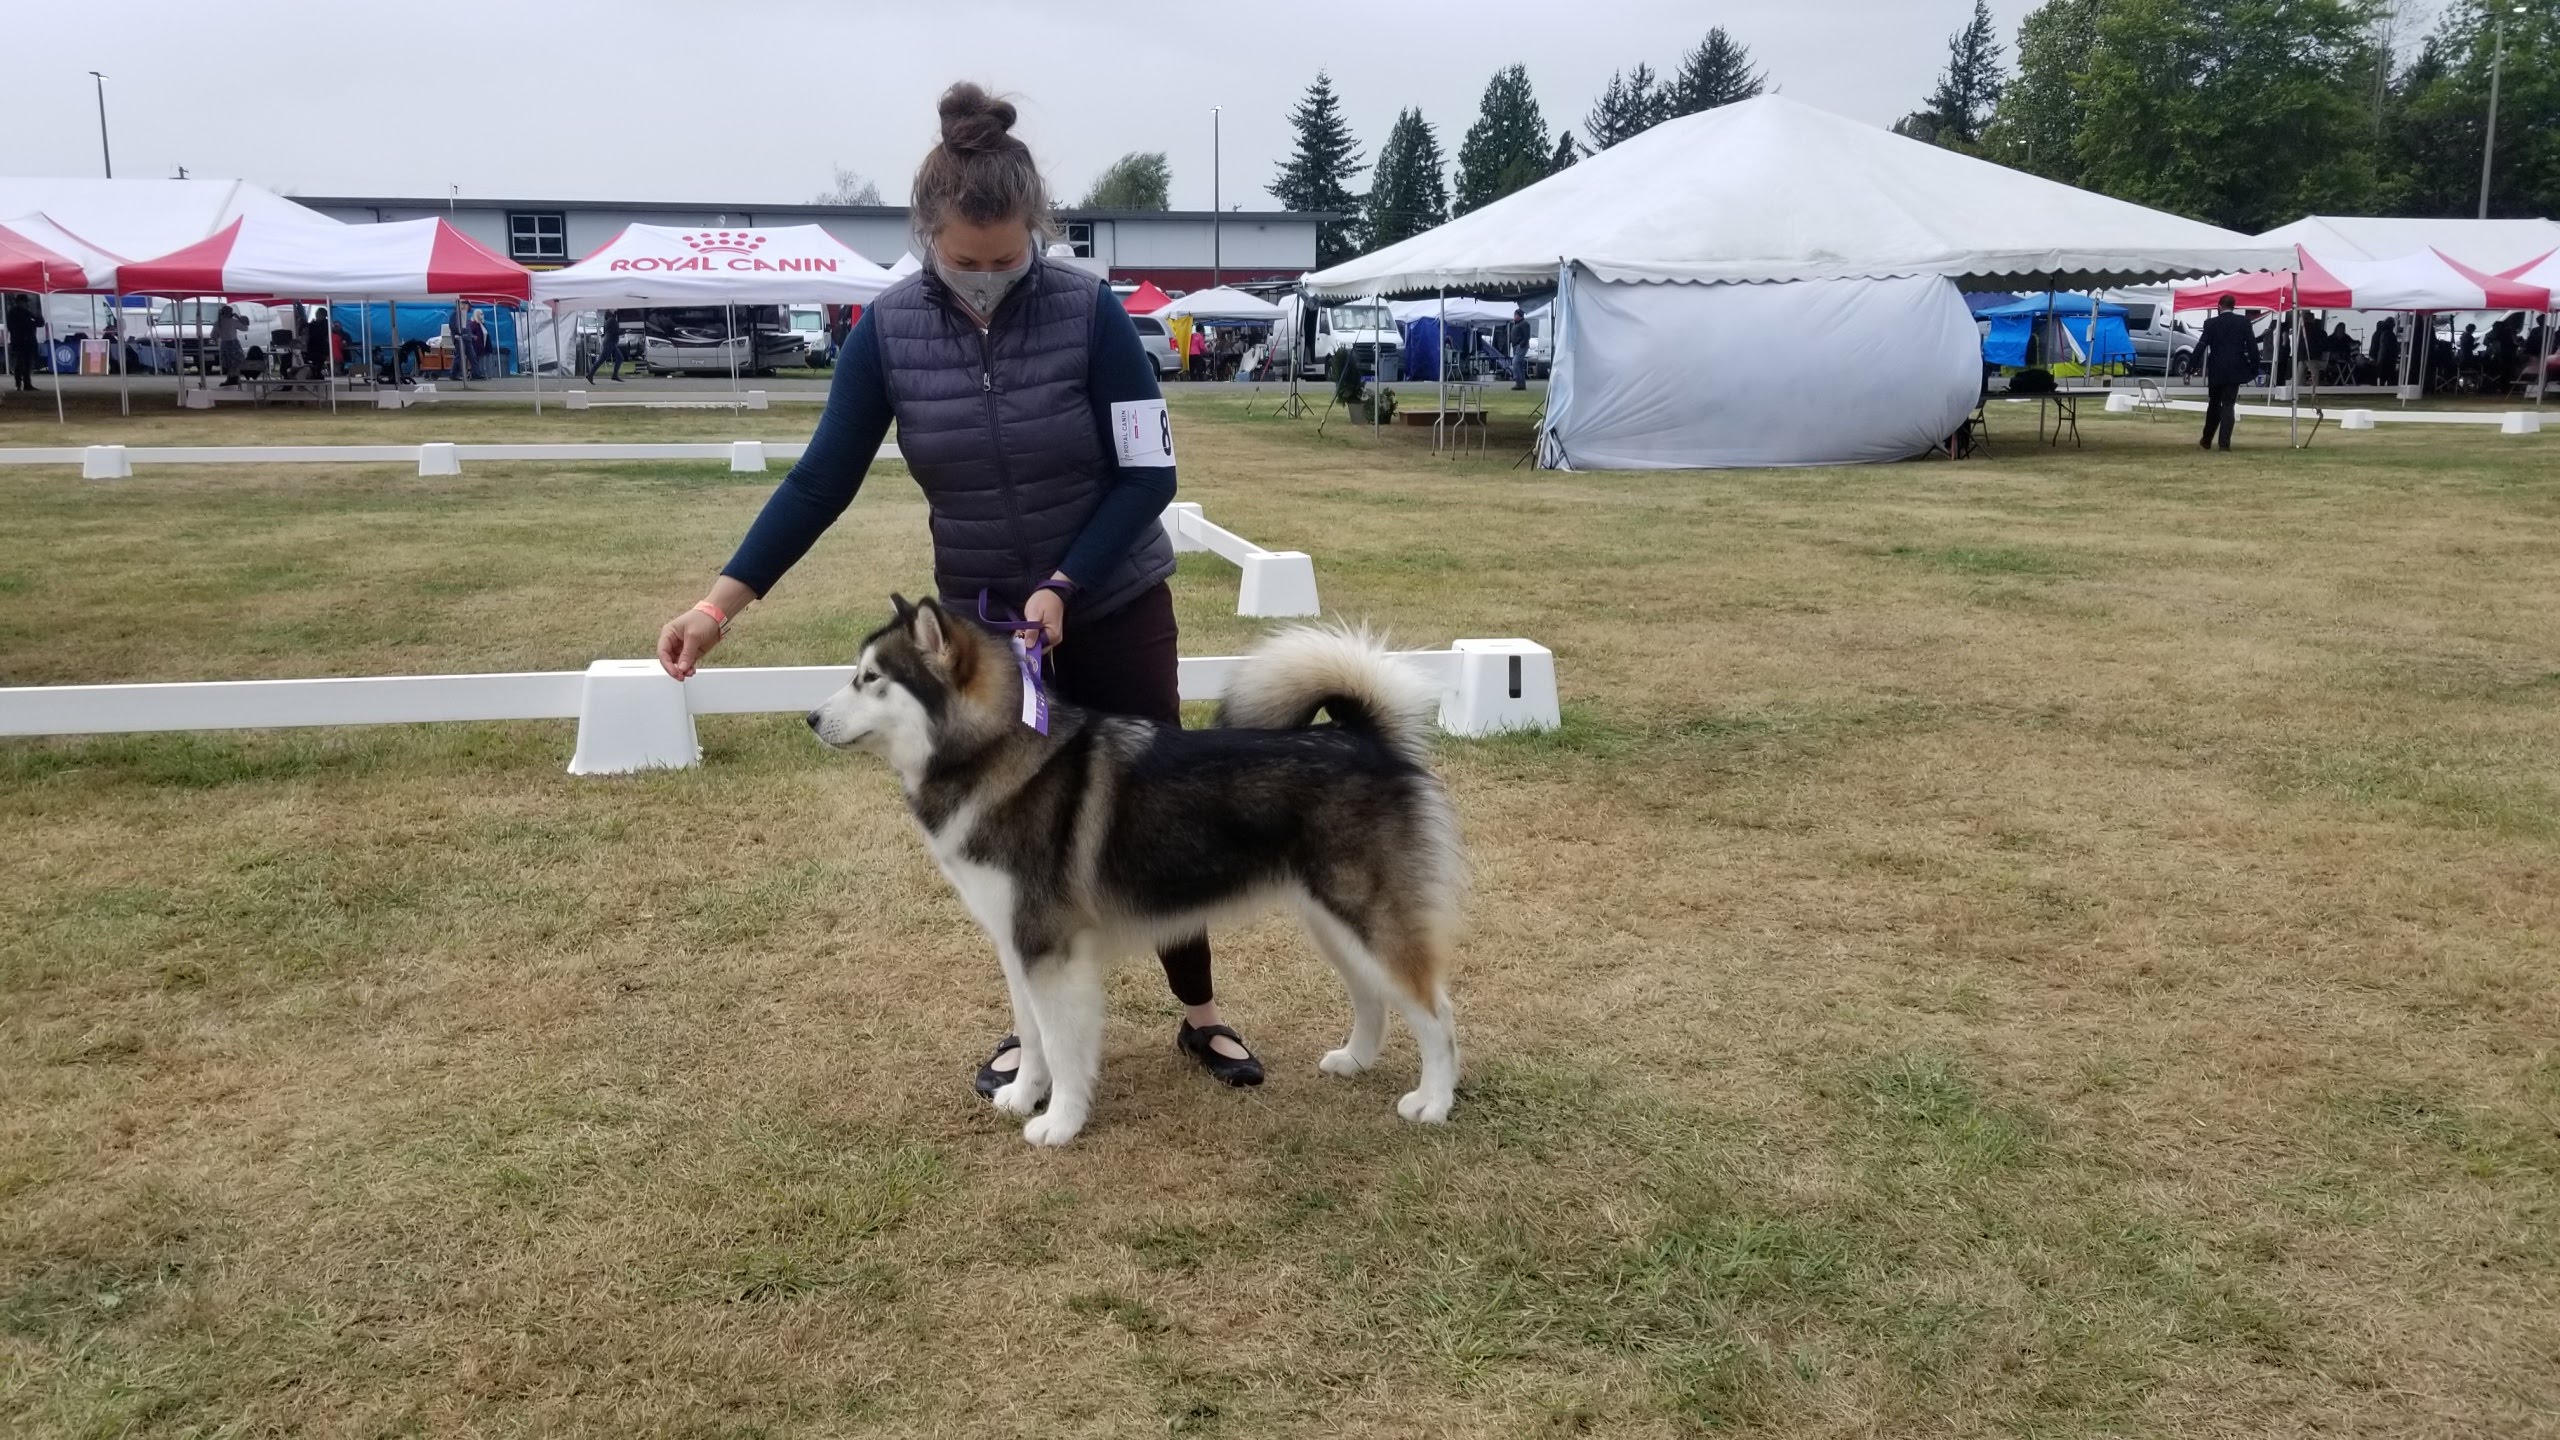 Posing at a dog show, 10 months